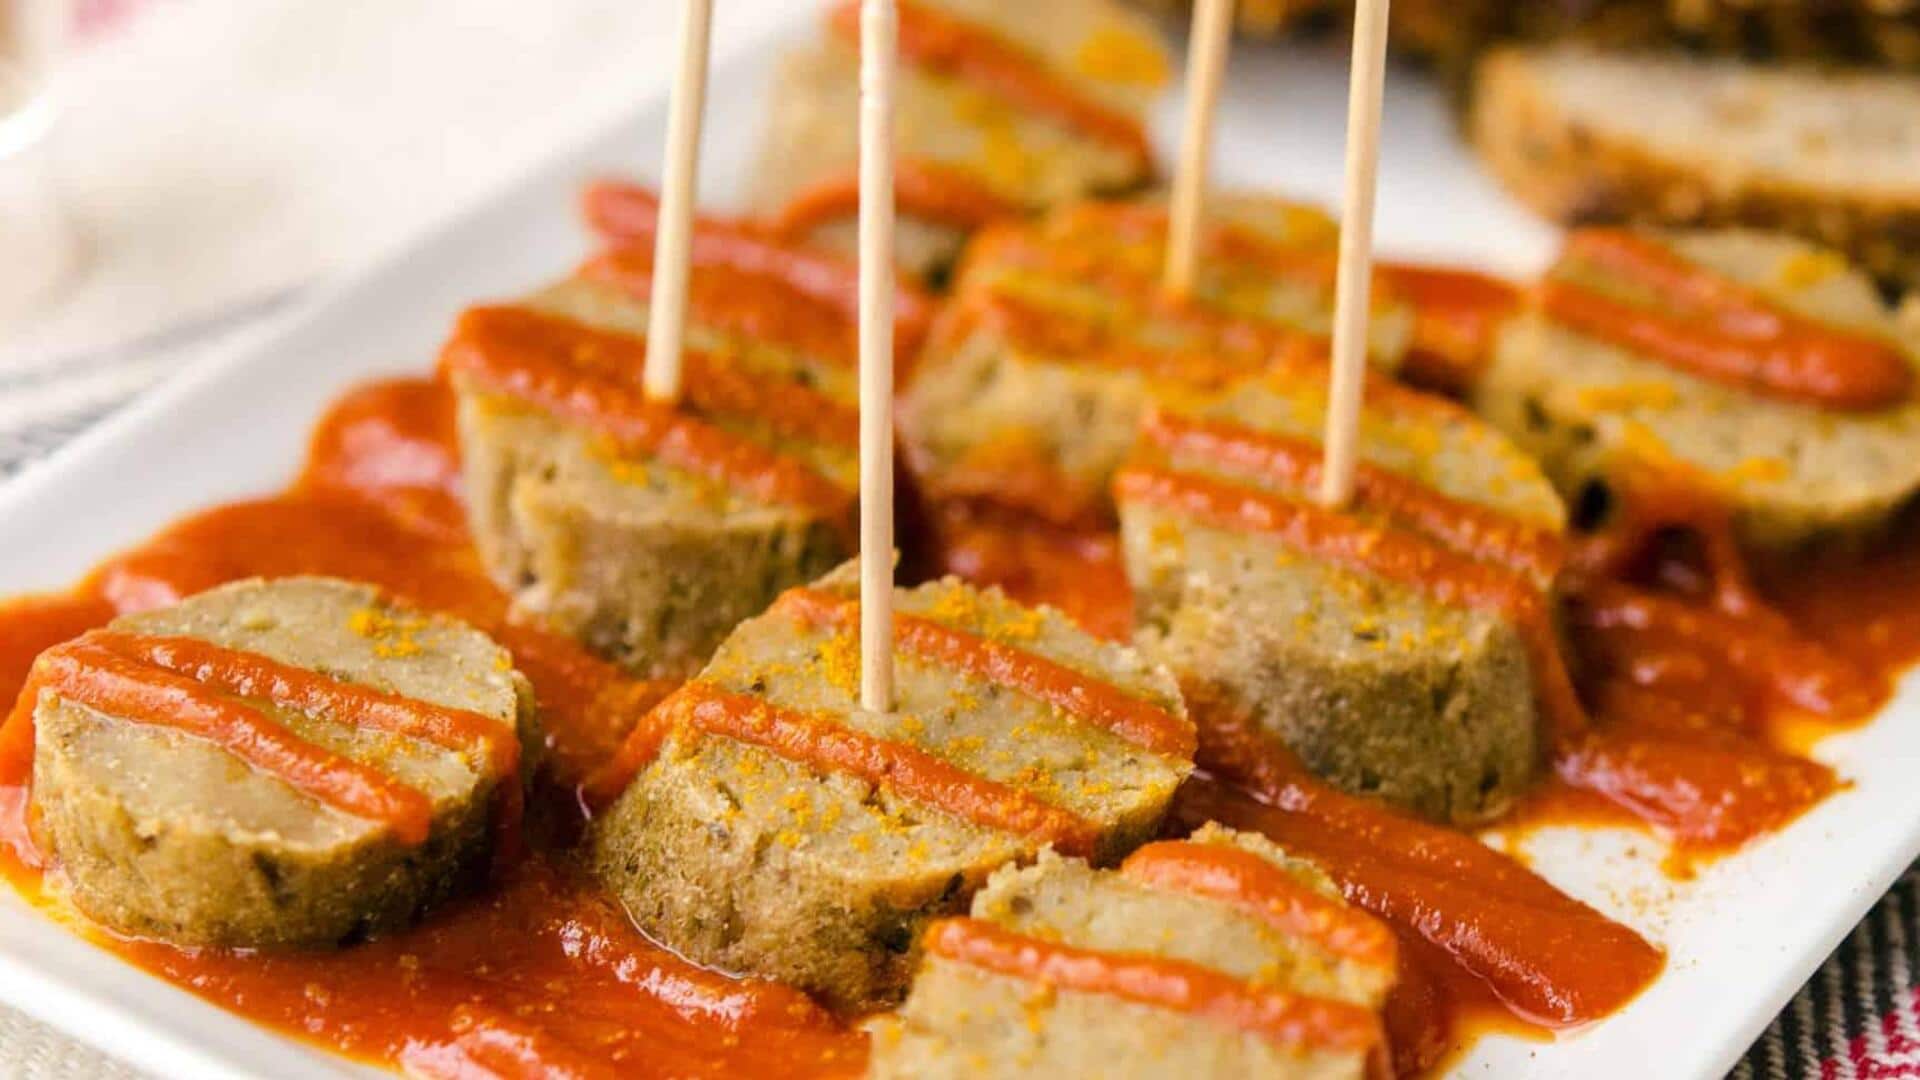 Try this vegan currywurst recipe at home